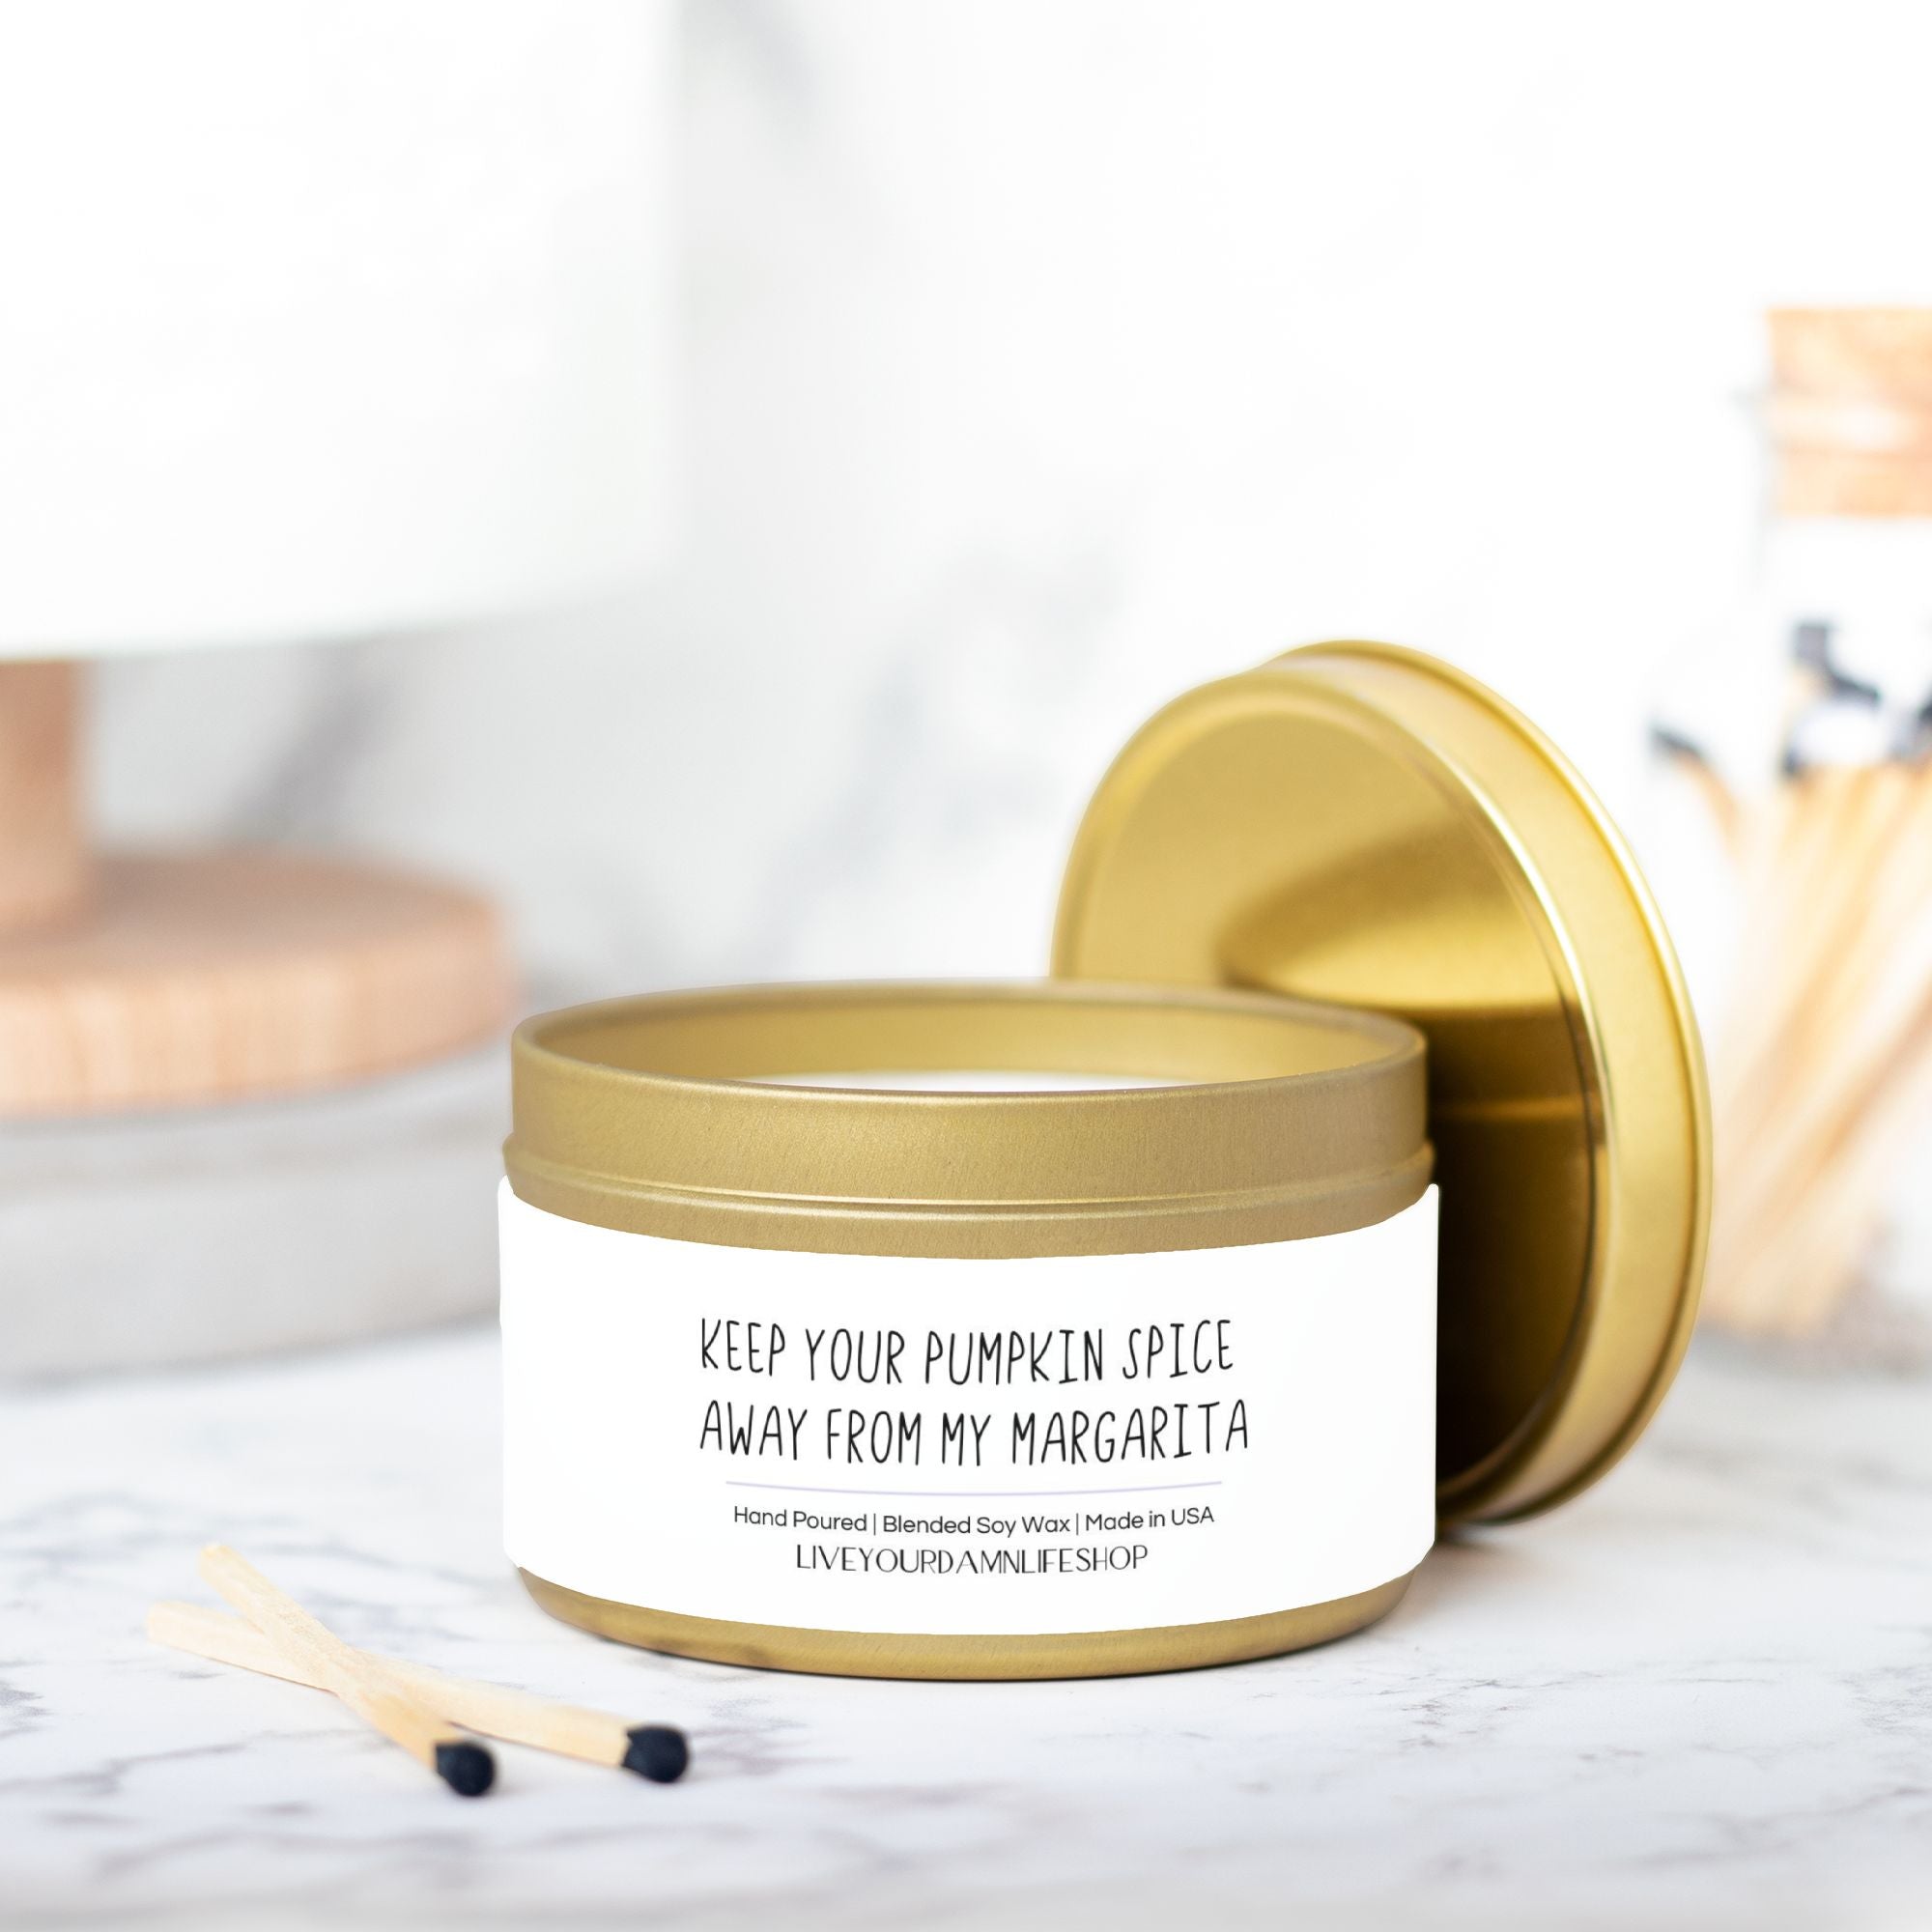 Keep Your Pumpkin Spice Away From My Margarita Candle Tin 8oz